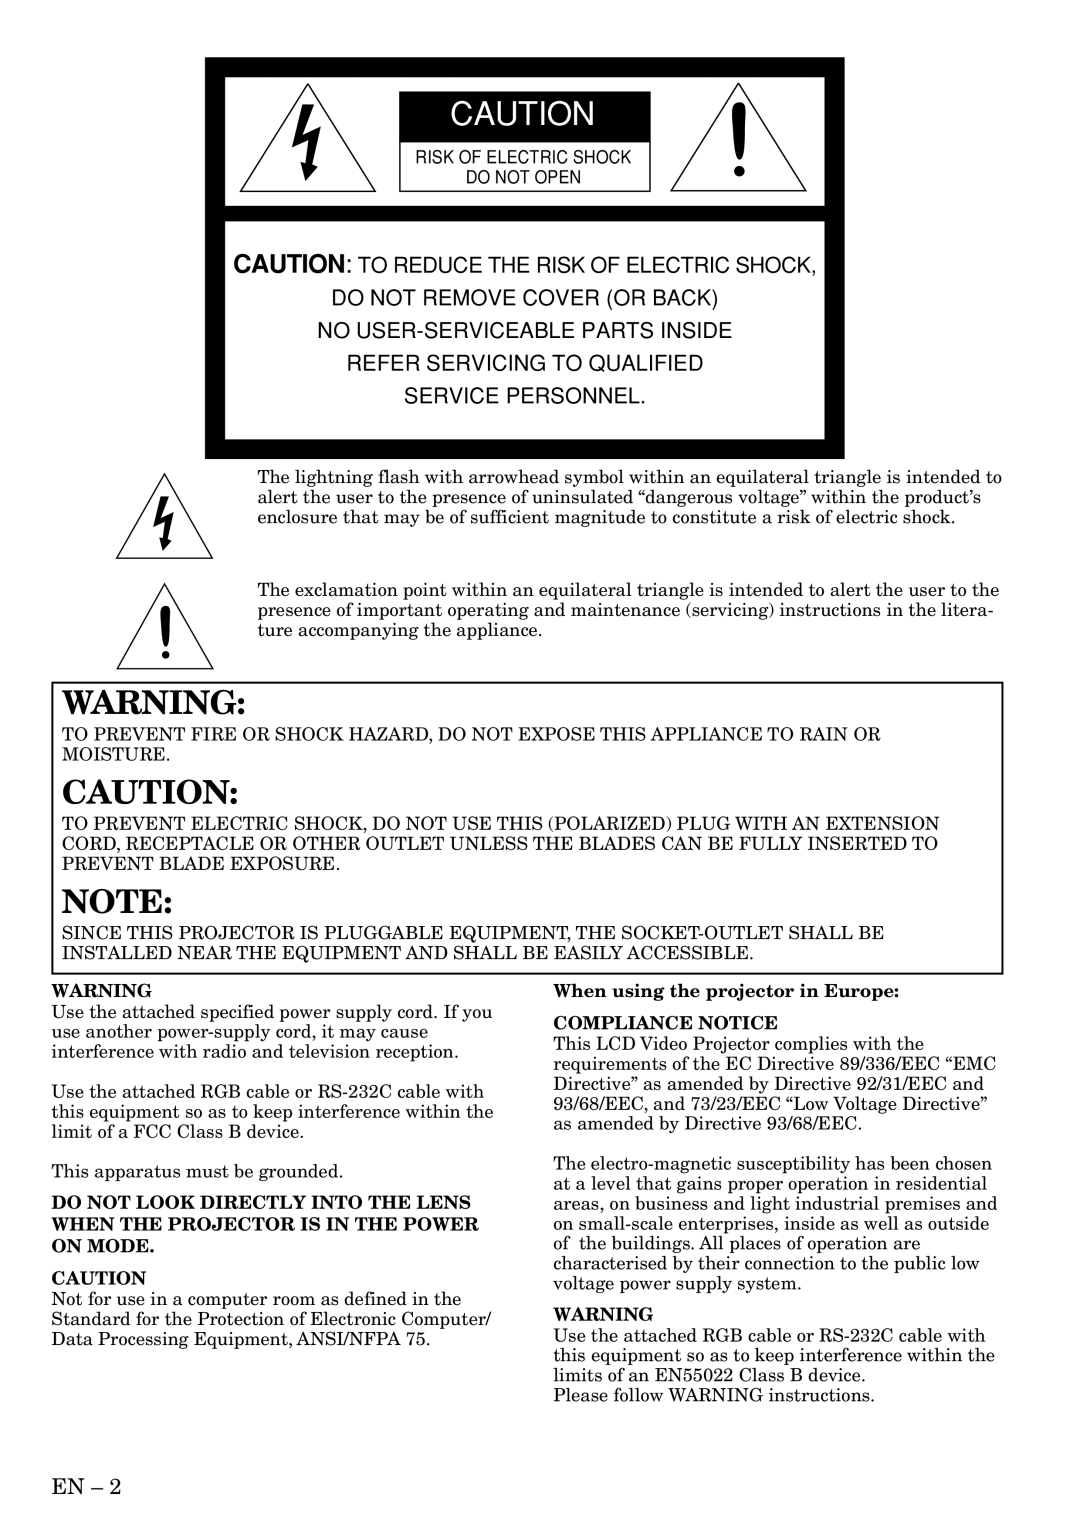 Mitsubishi Electronics XL5U user manual When using the projector in Europe COMPLIANCE NOTICE 